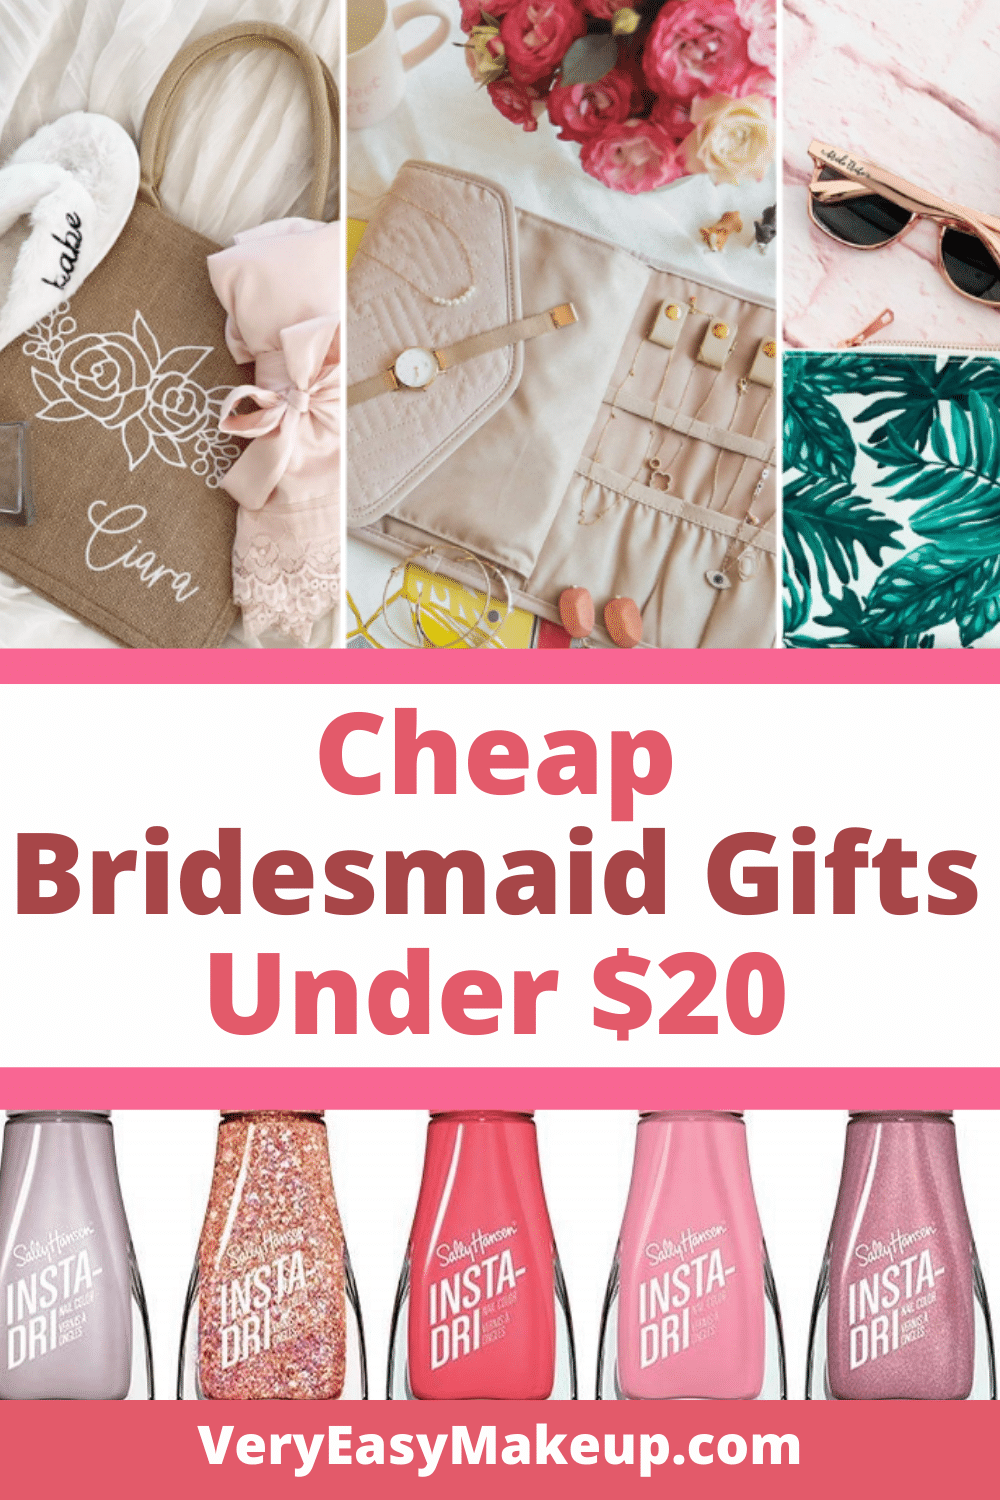 cheap bridesmaid gifts under $20 on Amazon